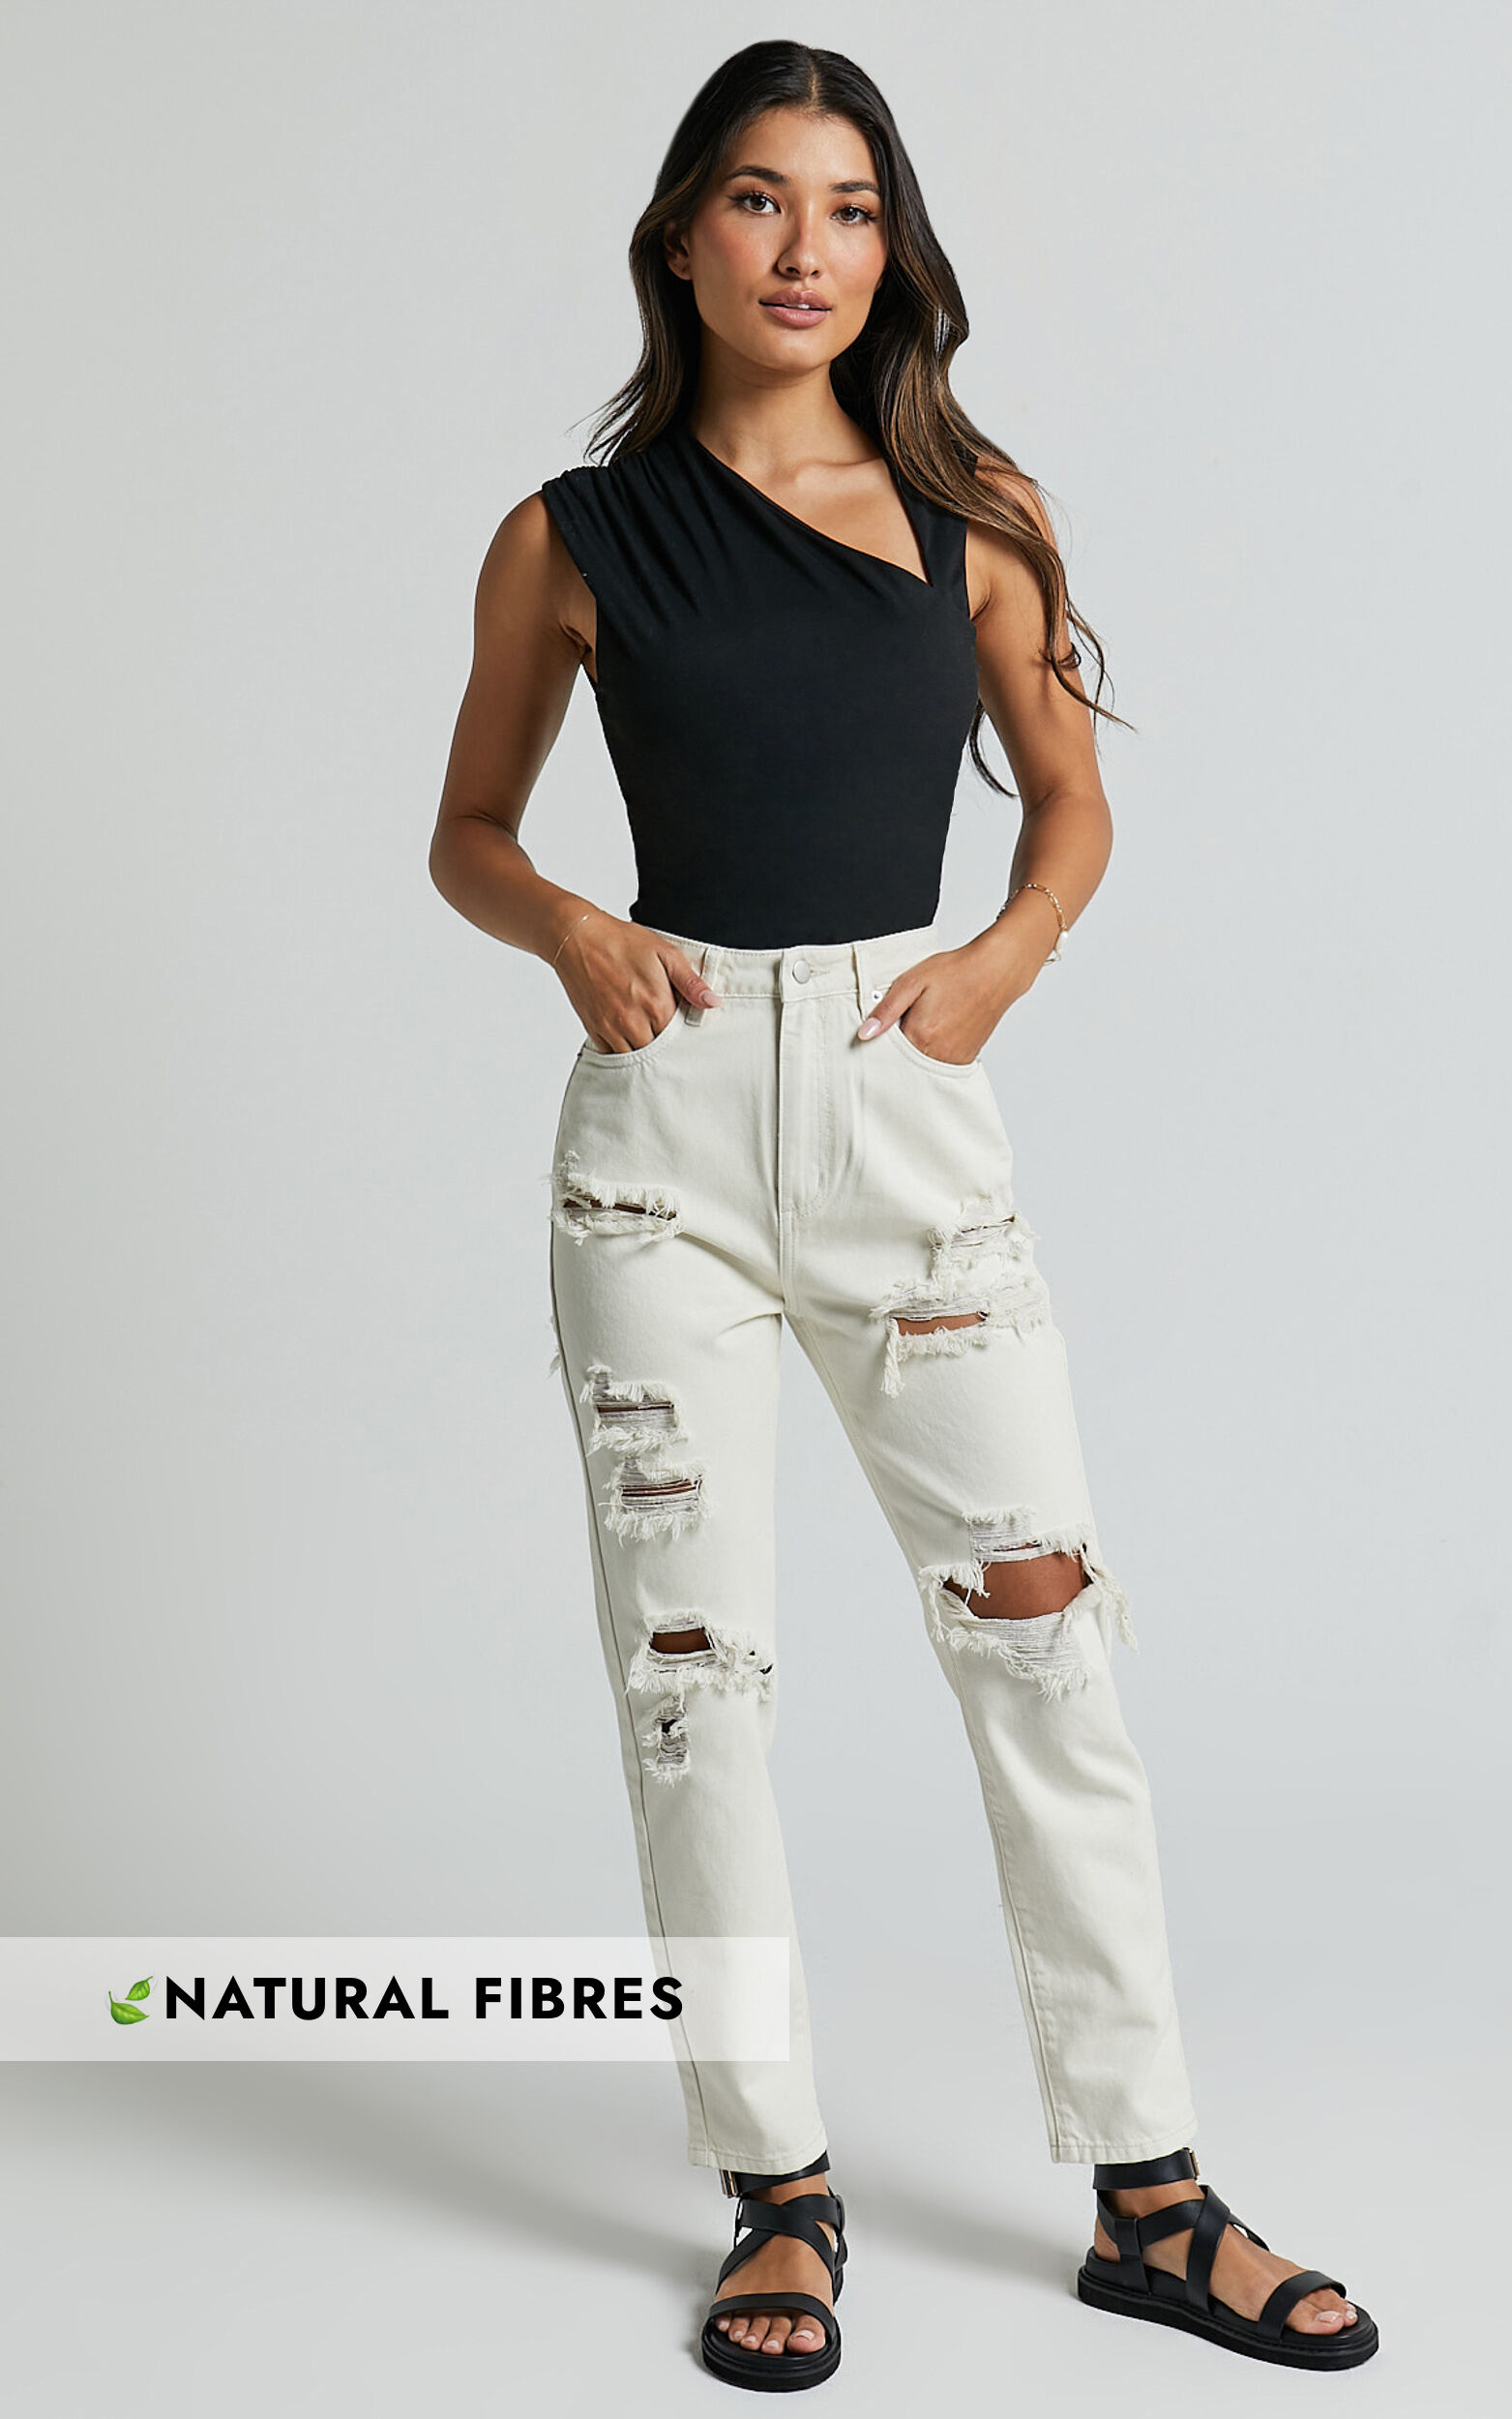 Billie Jeans - High Waisted Cotton Distressed Mom Denim Jeans in Ecru - 04, CRE1